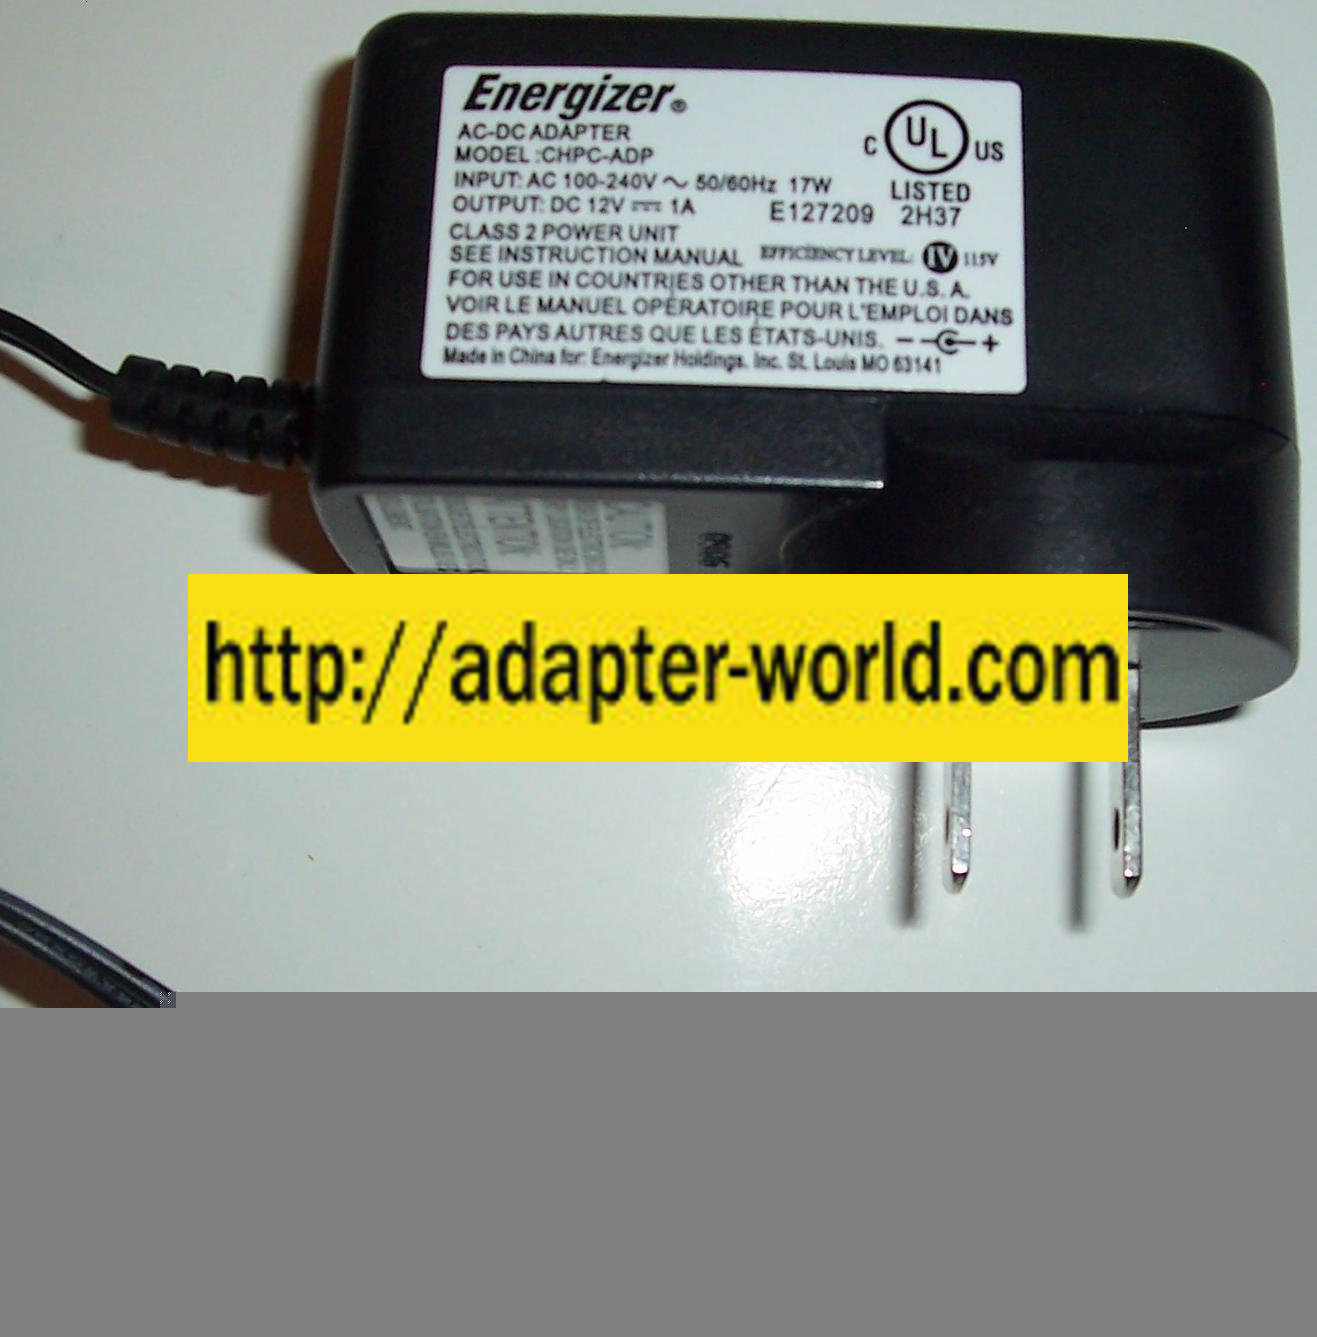 ENERGIZER CHPC-ADP AC DC ADAPTER 12V 1A CLASS 2 POWER SUPPLY - Click Image to Close